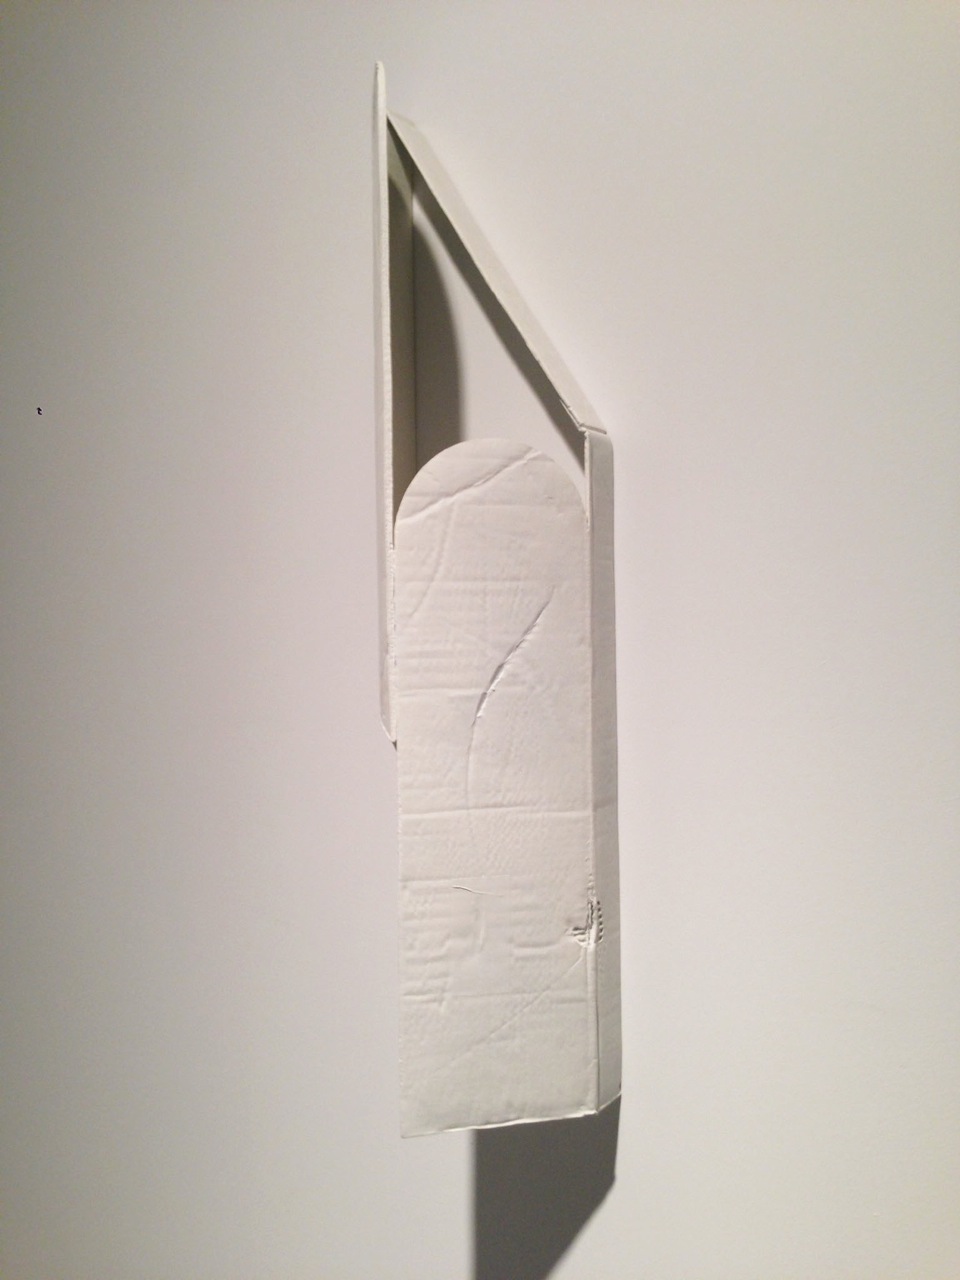 Ricky Swallow, Skewed Arches/Tall 1, 2013 (curated by Michelle Grabner)